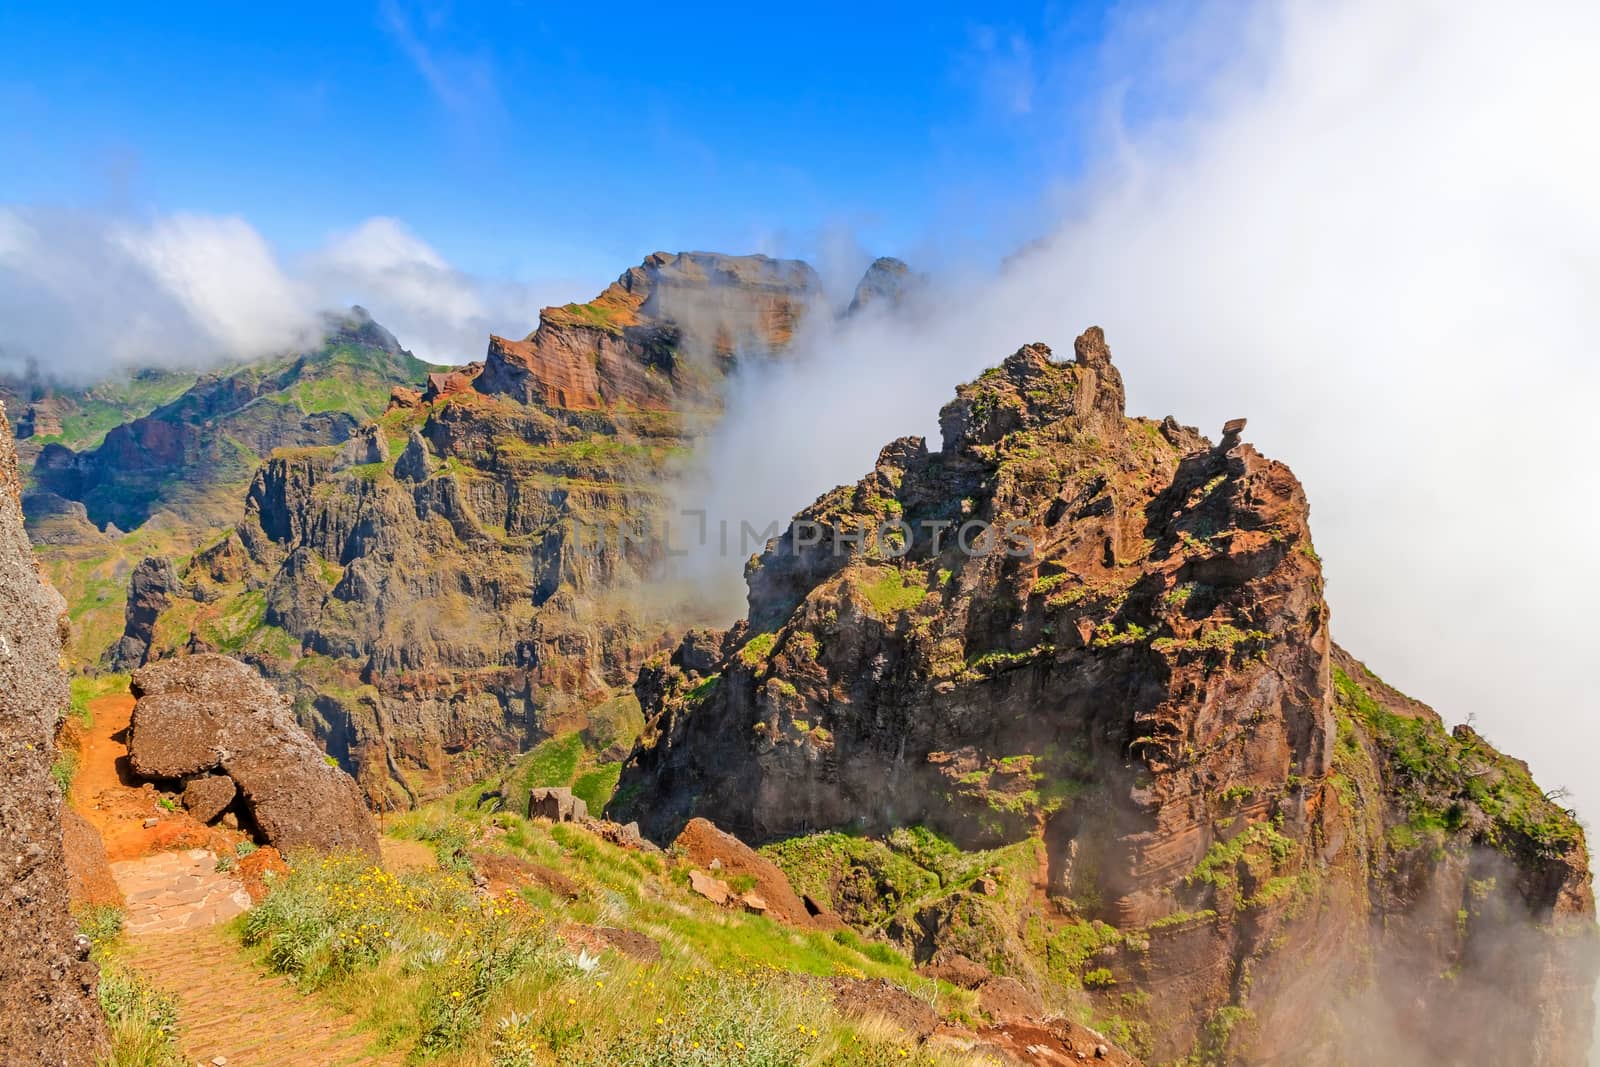 Colorful volcanic mountain landscape with clouds - hiking path from Pico do Arieiro to Pico Ruivo, Madeira, Portugal